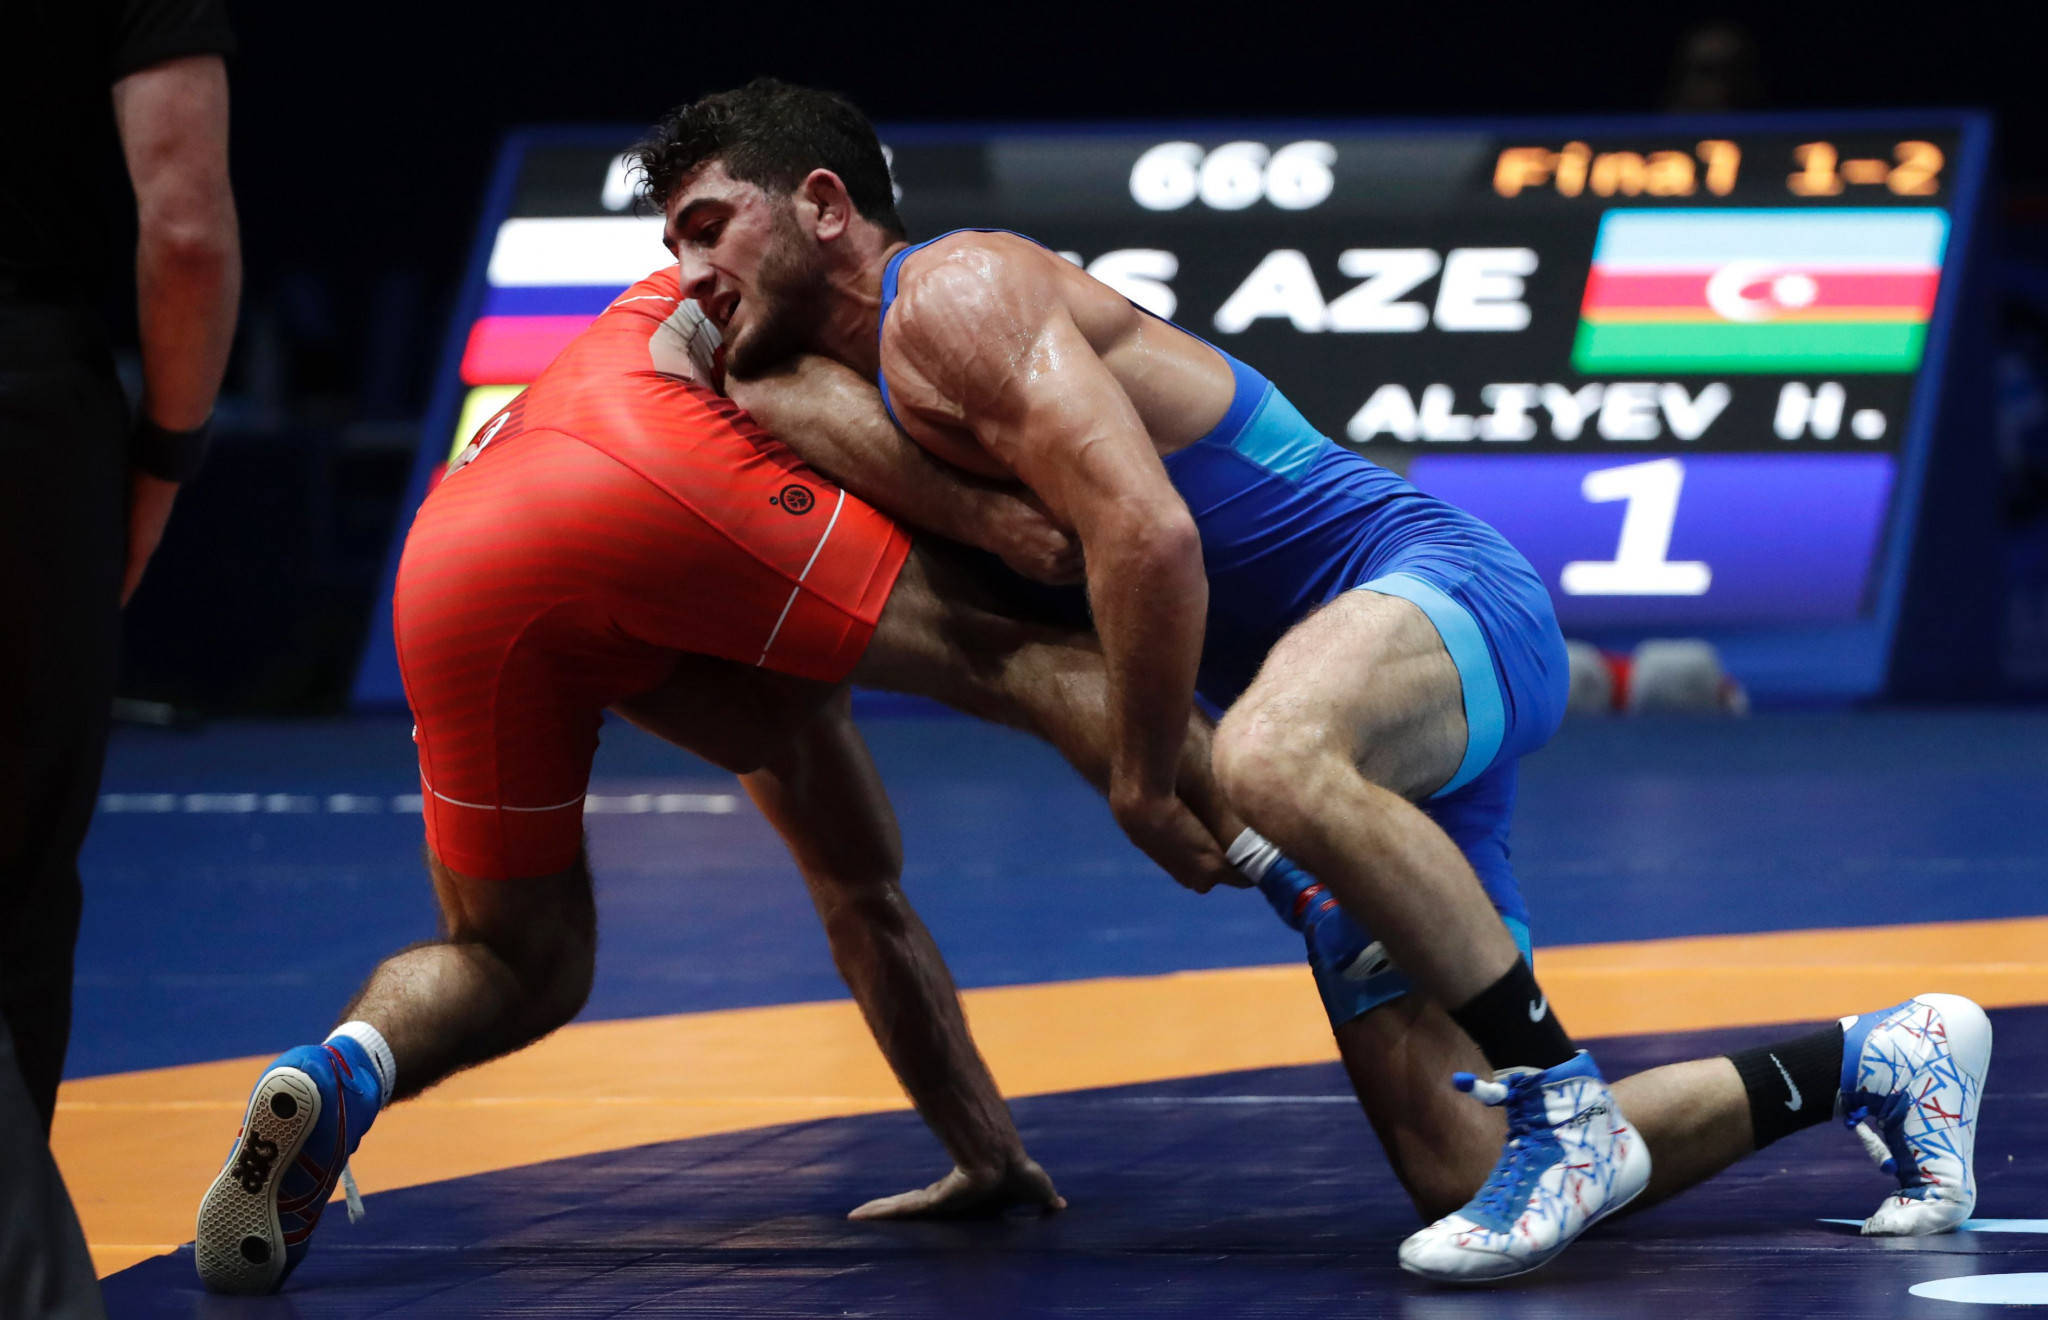 Haji Aliyev is among 280 wrestlers that will be battling it out to secure a place at this year's rescheduled Tokyo 2020 Olympics ©Getty Images 